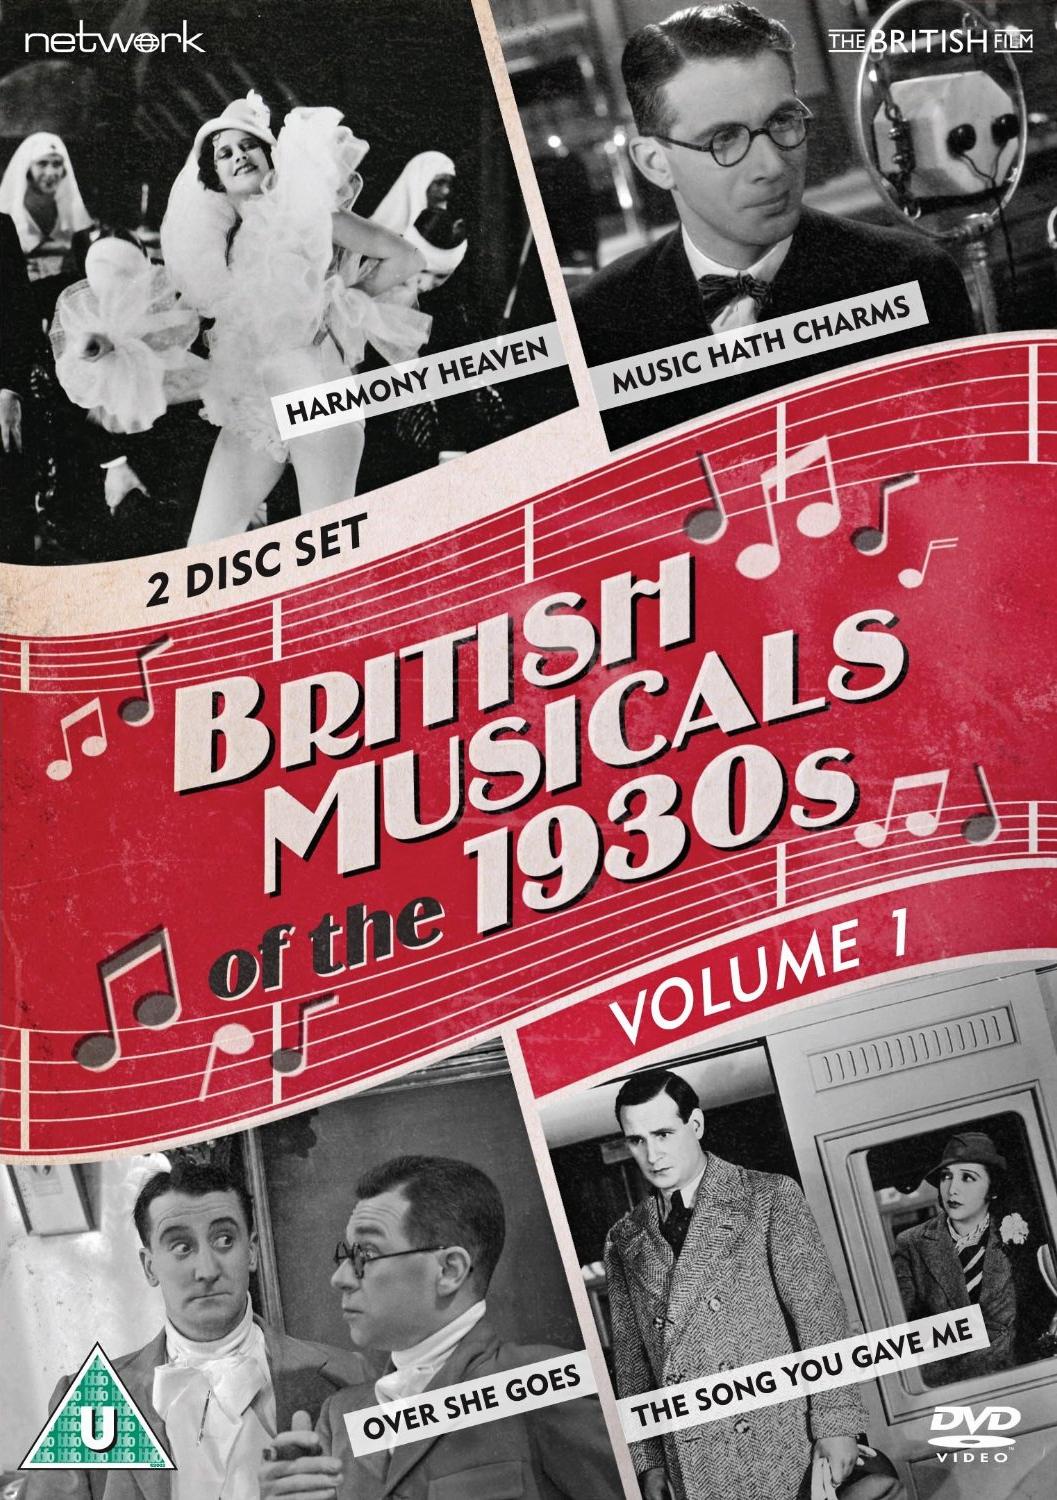 British Musicals of the 1930s Volume 1 DVD from Network and The British Film